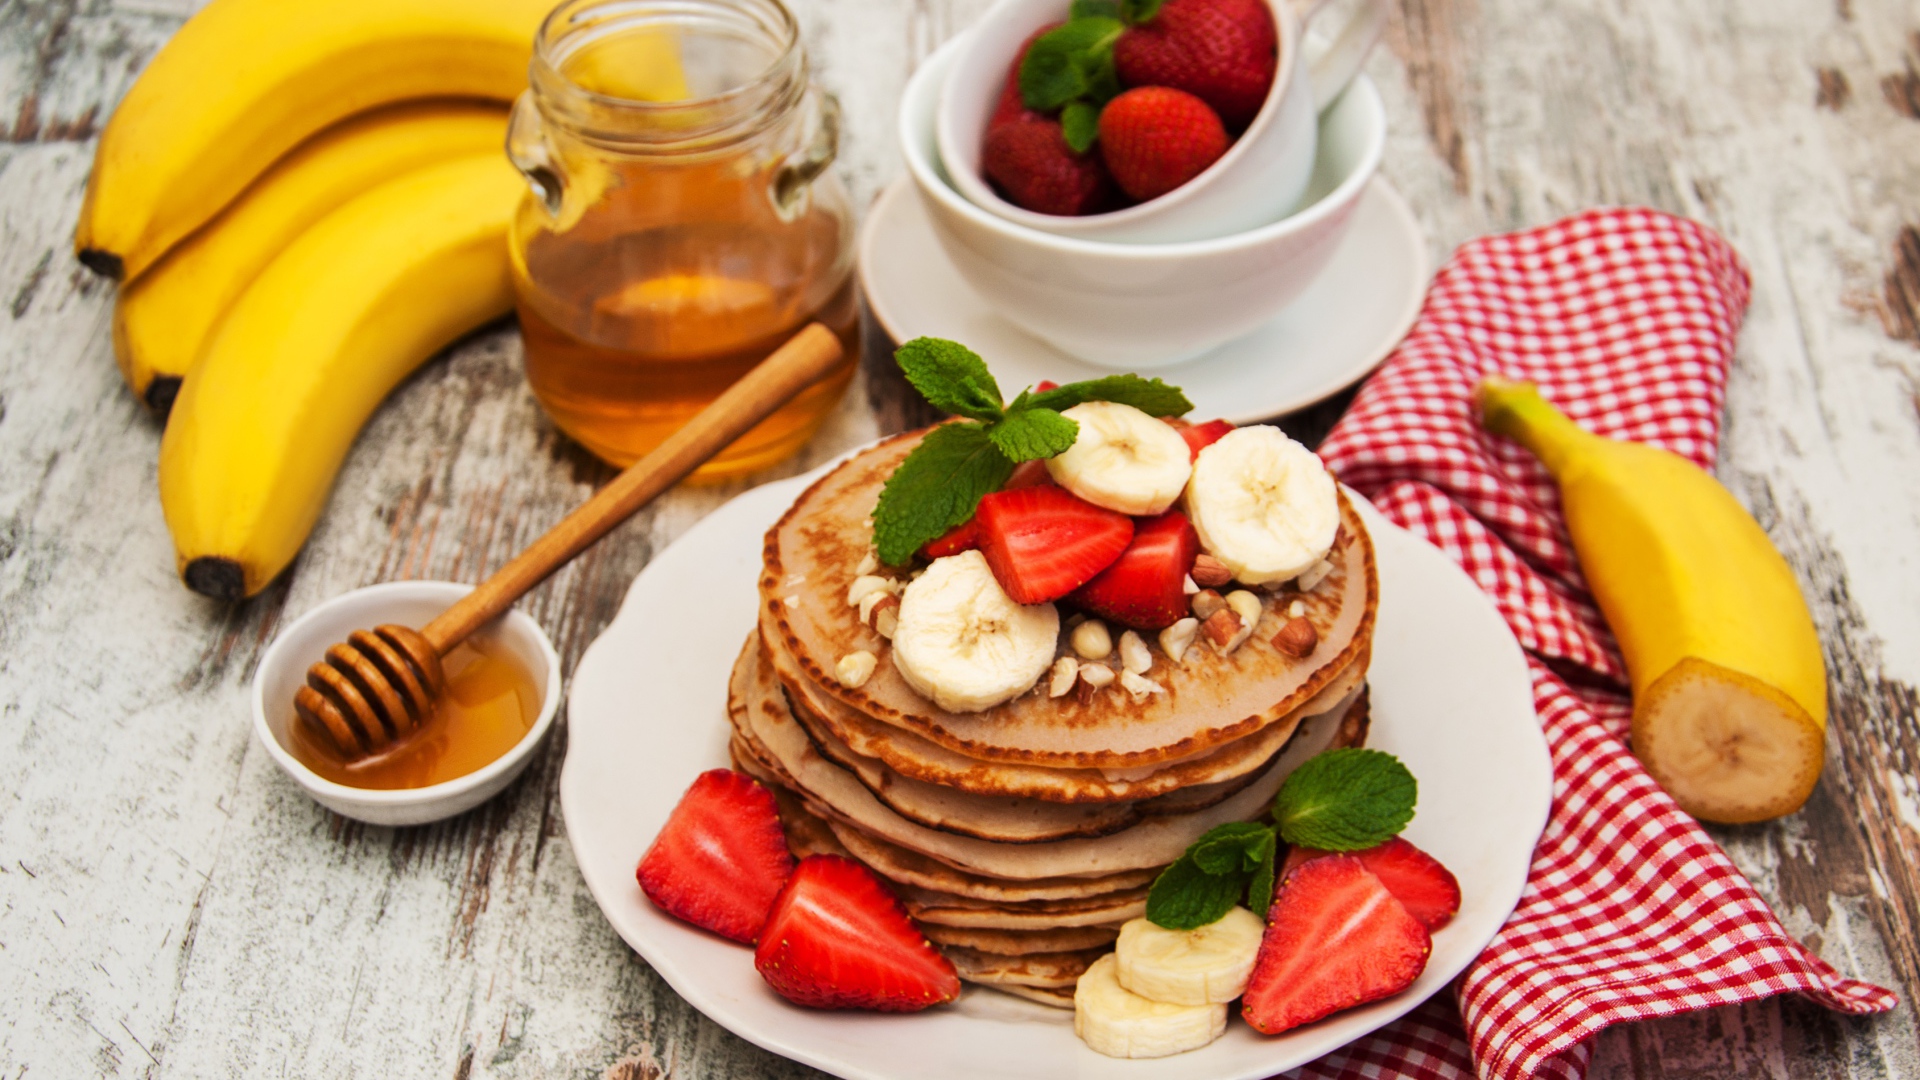 Fritters with bananas and strawberries on a table with honey